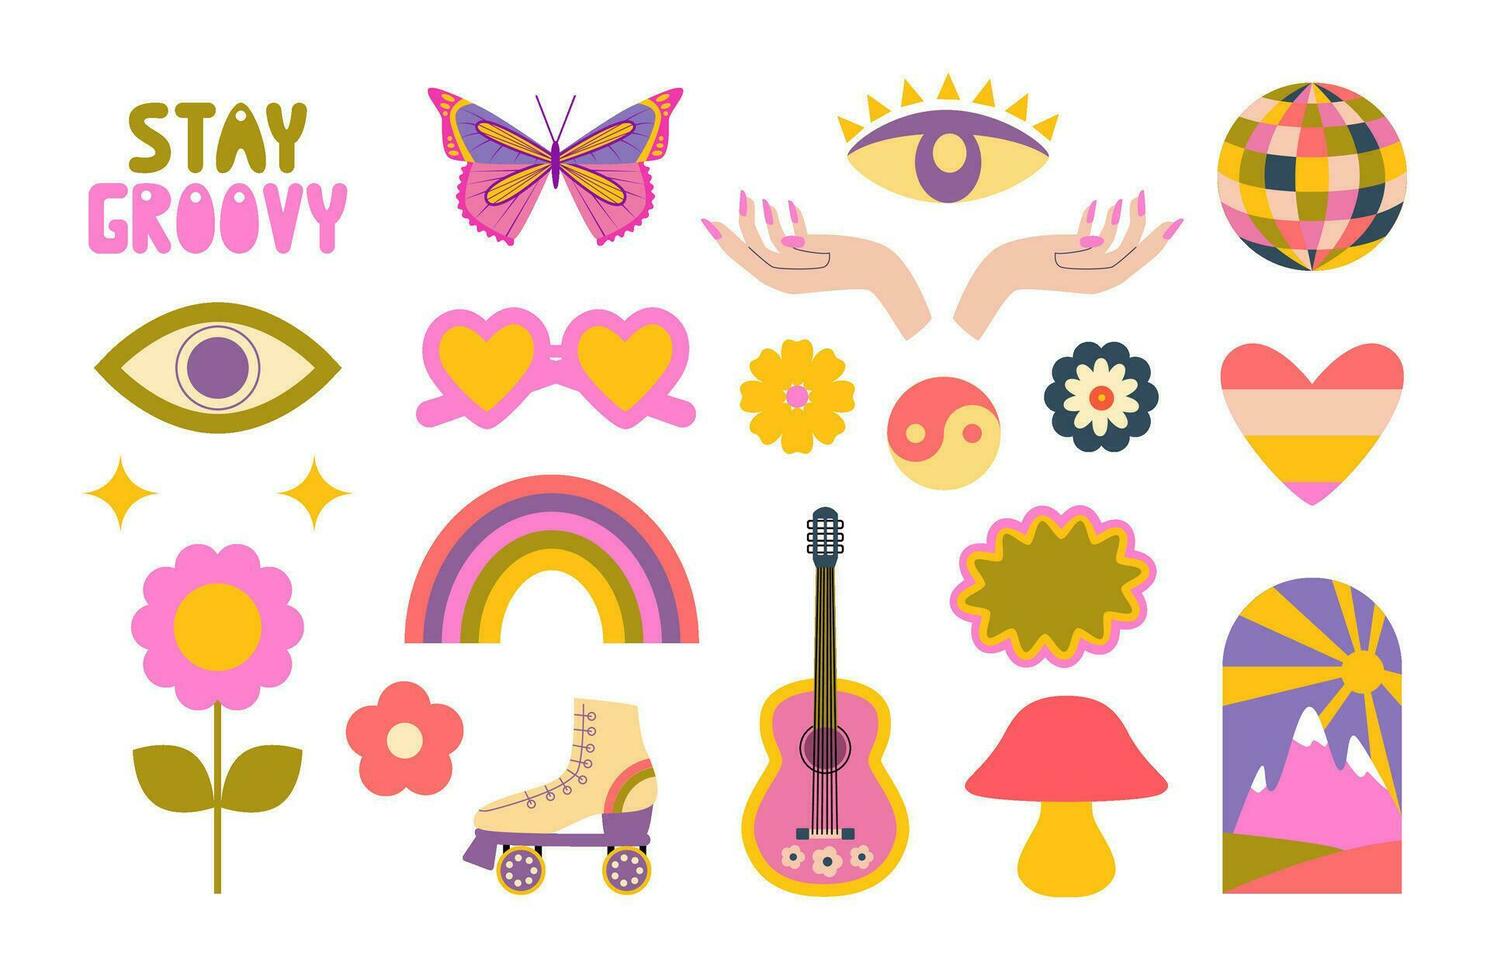 Retro groovy hippie stickers and doodles. Stay groovy. Rainbow, psychedelic mushrooms, groovy flowers, eyes, butterfly, roller skate, guitar. vector